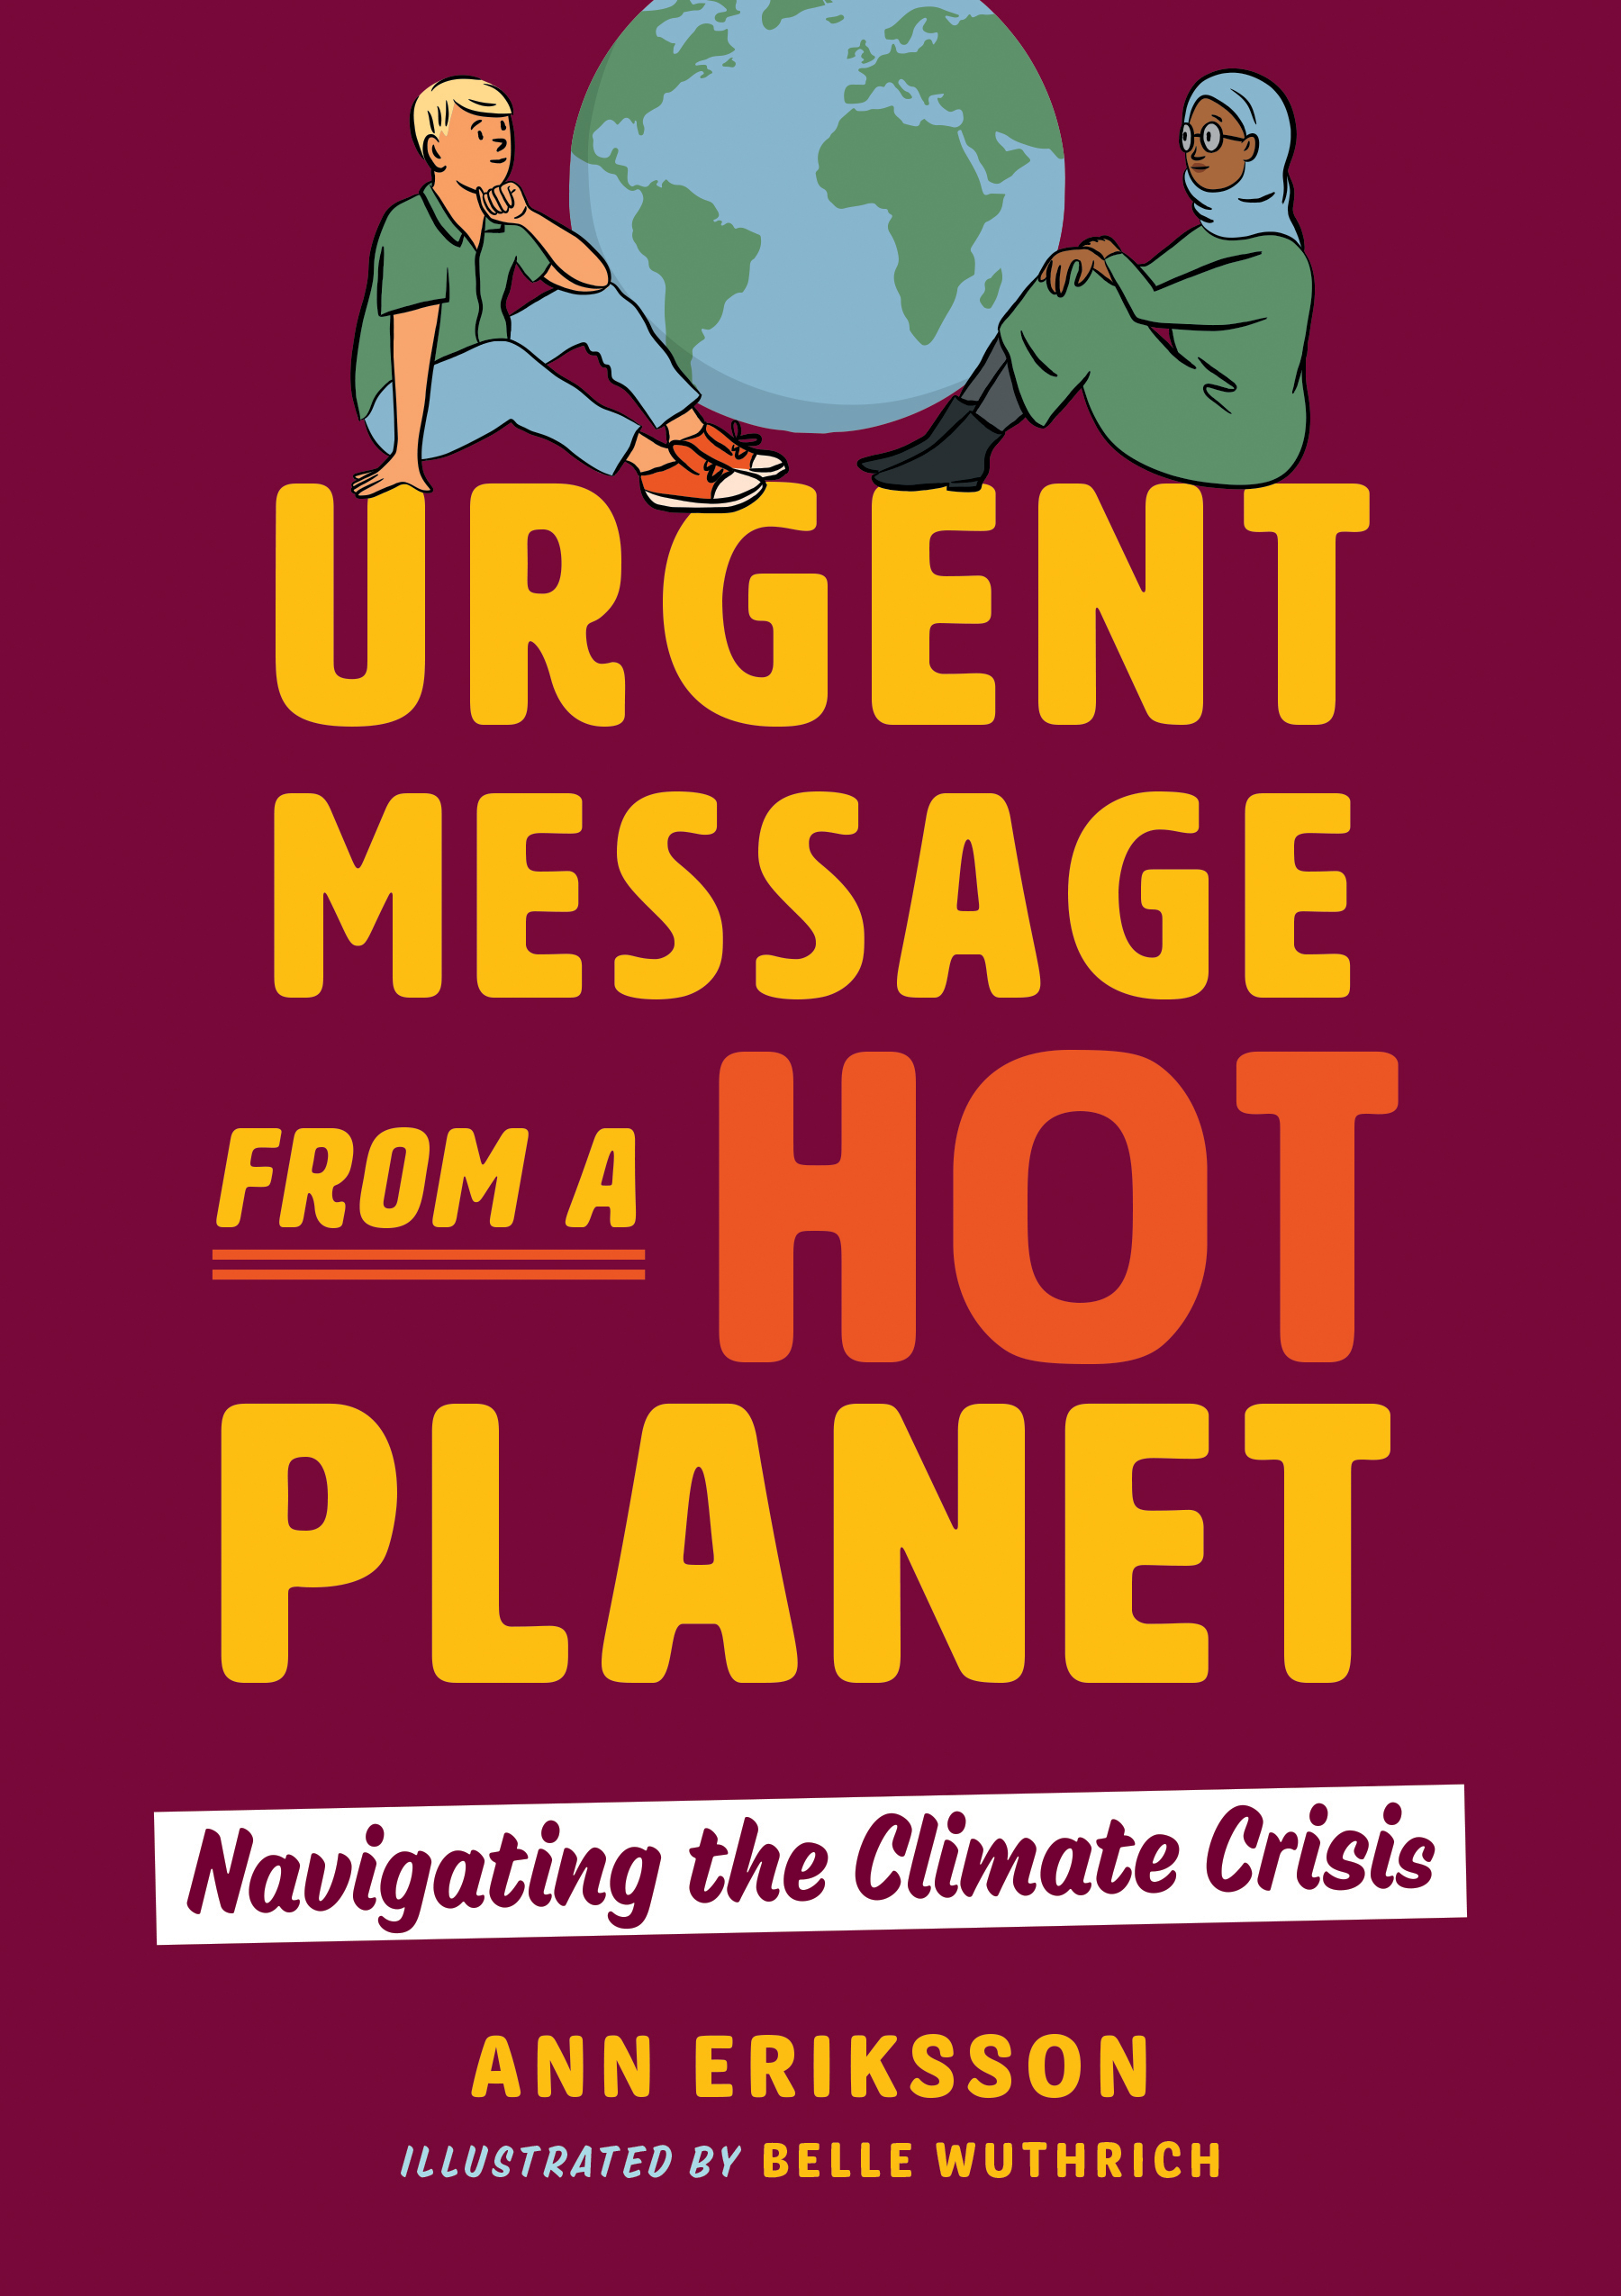 New nonfiction book for young readers raises the alarm for the climate crisis